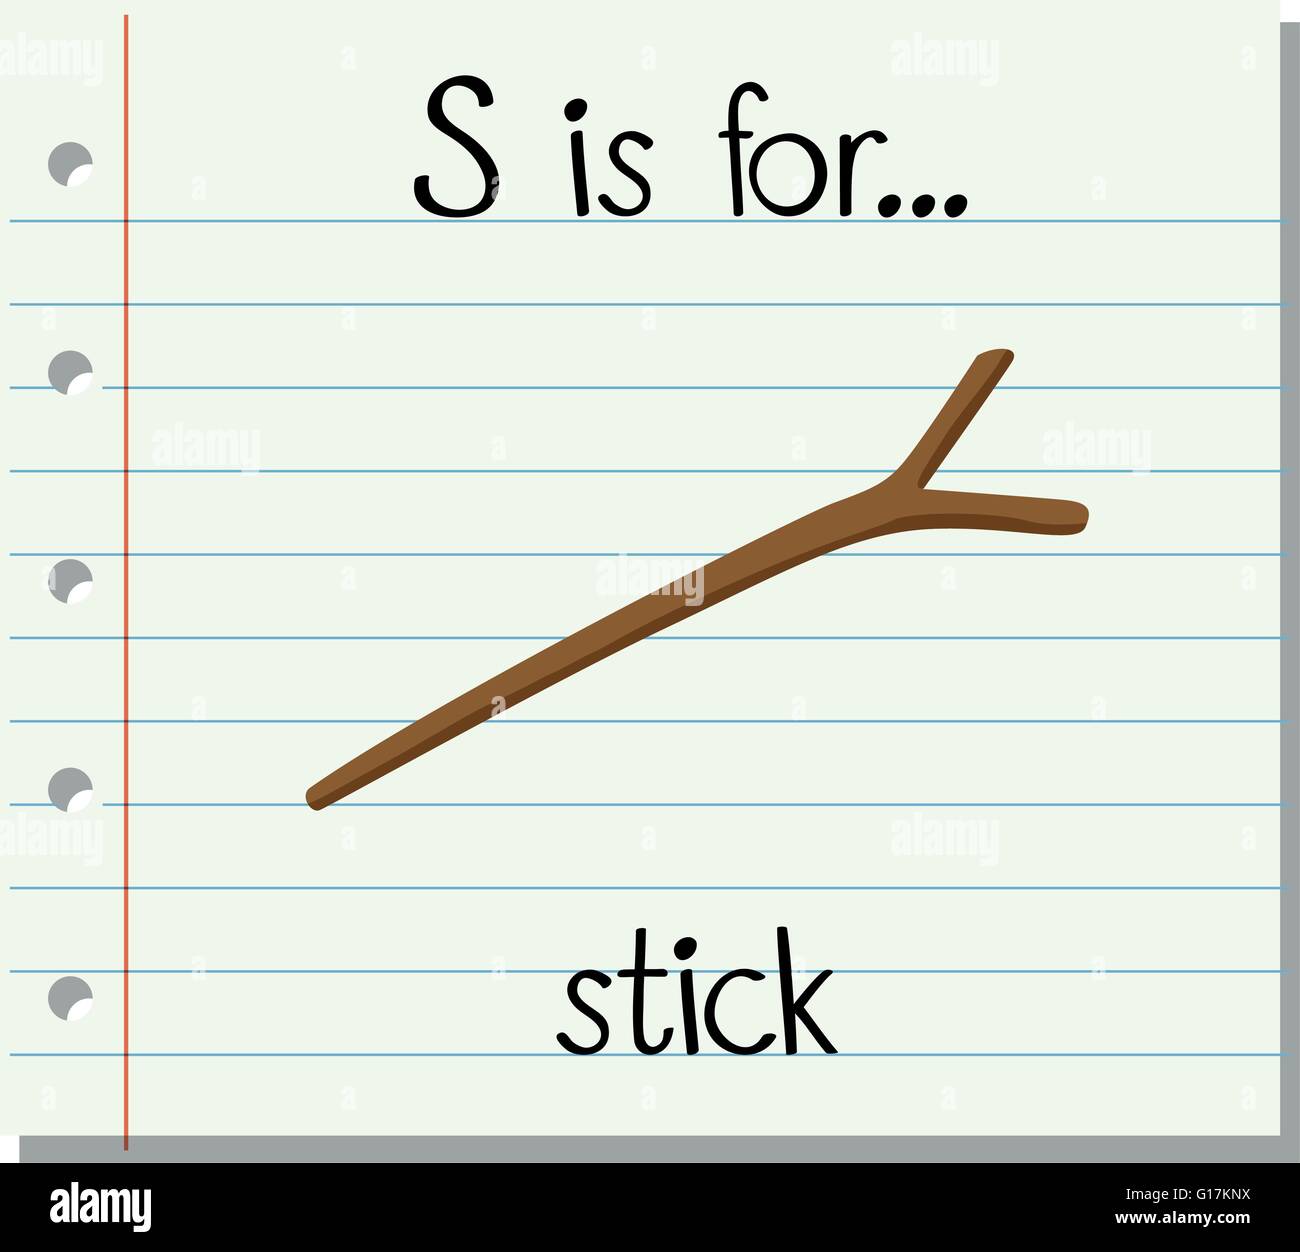 Flashcard letter S is for stick illustration Stock Vector